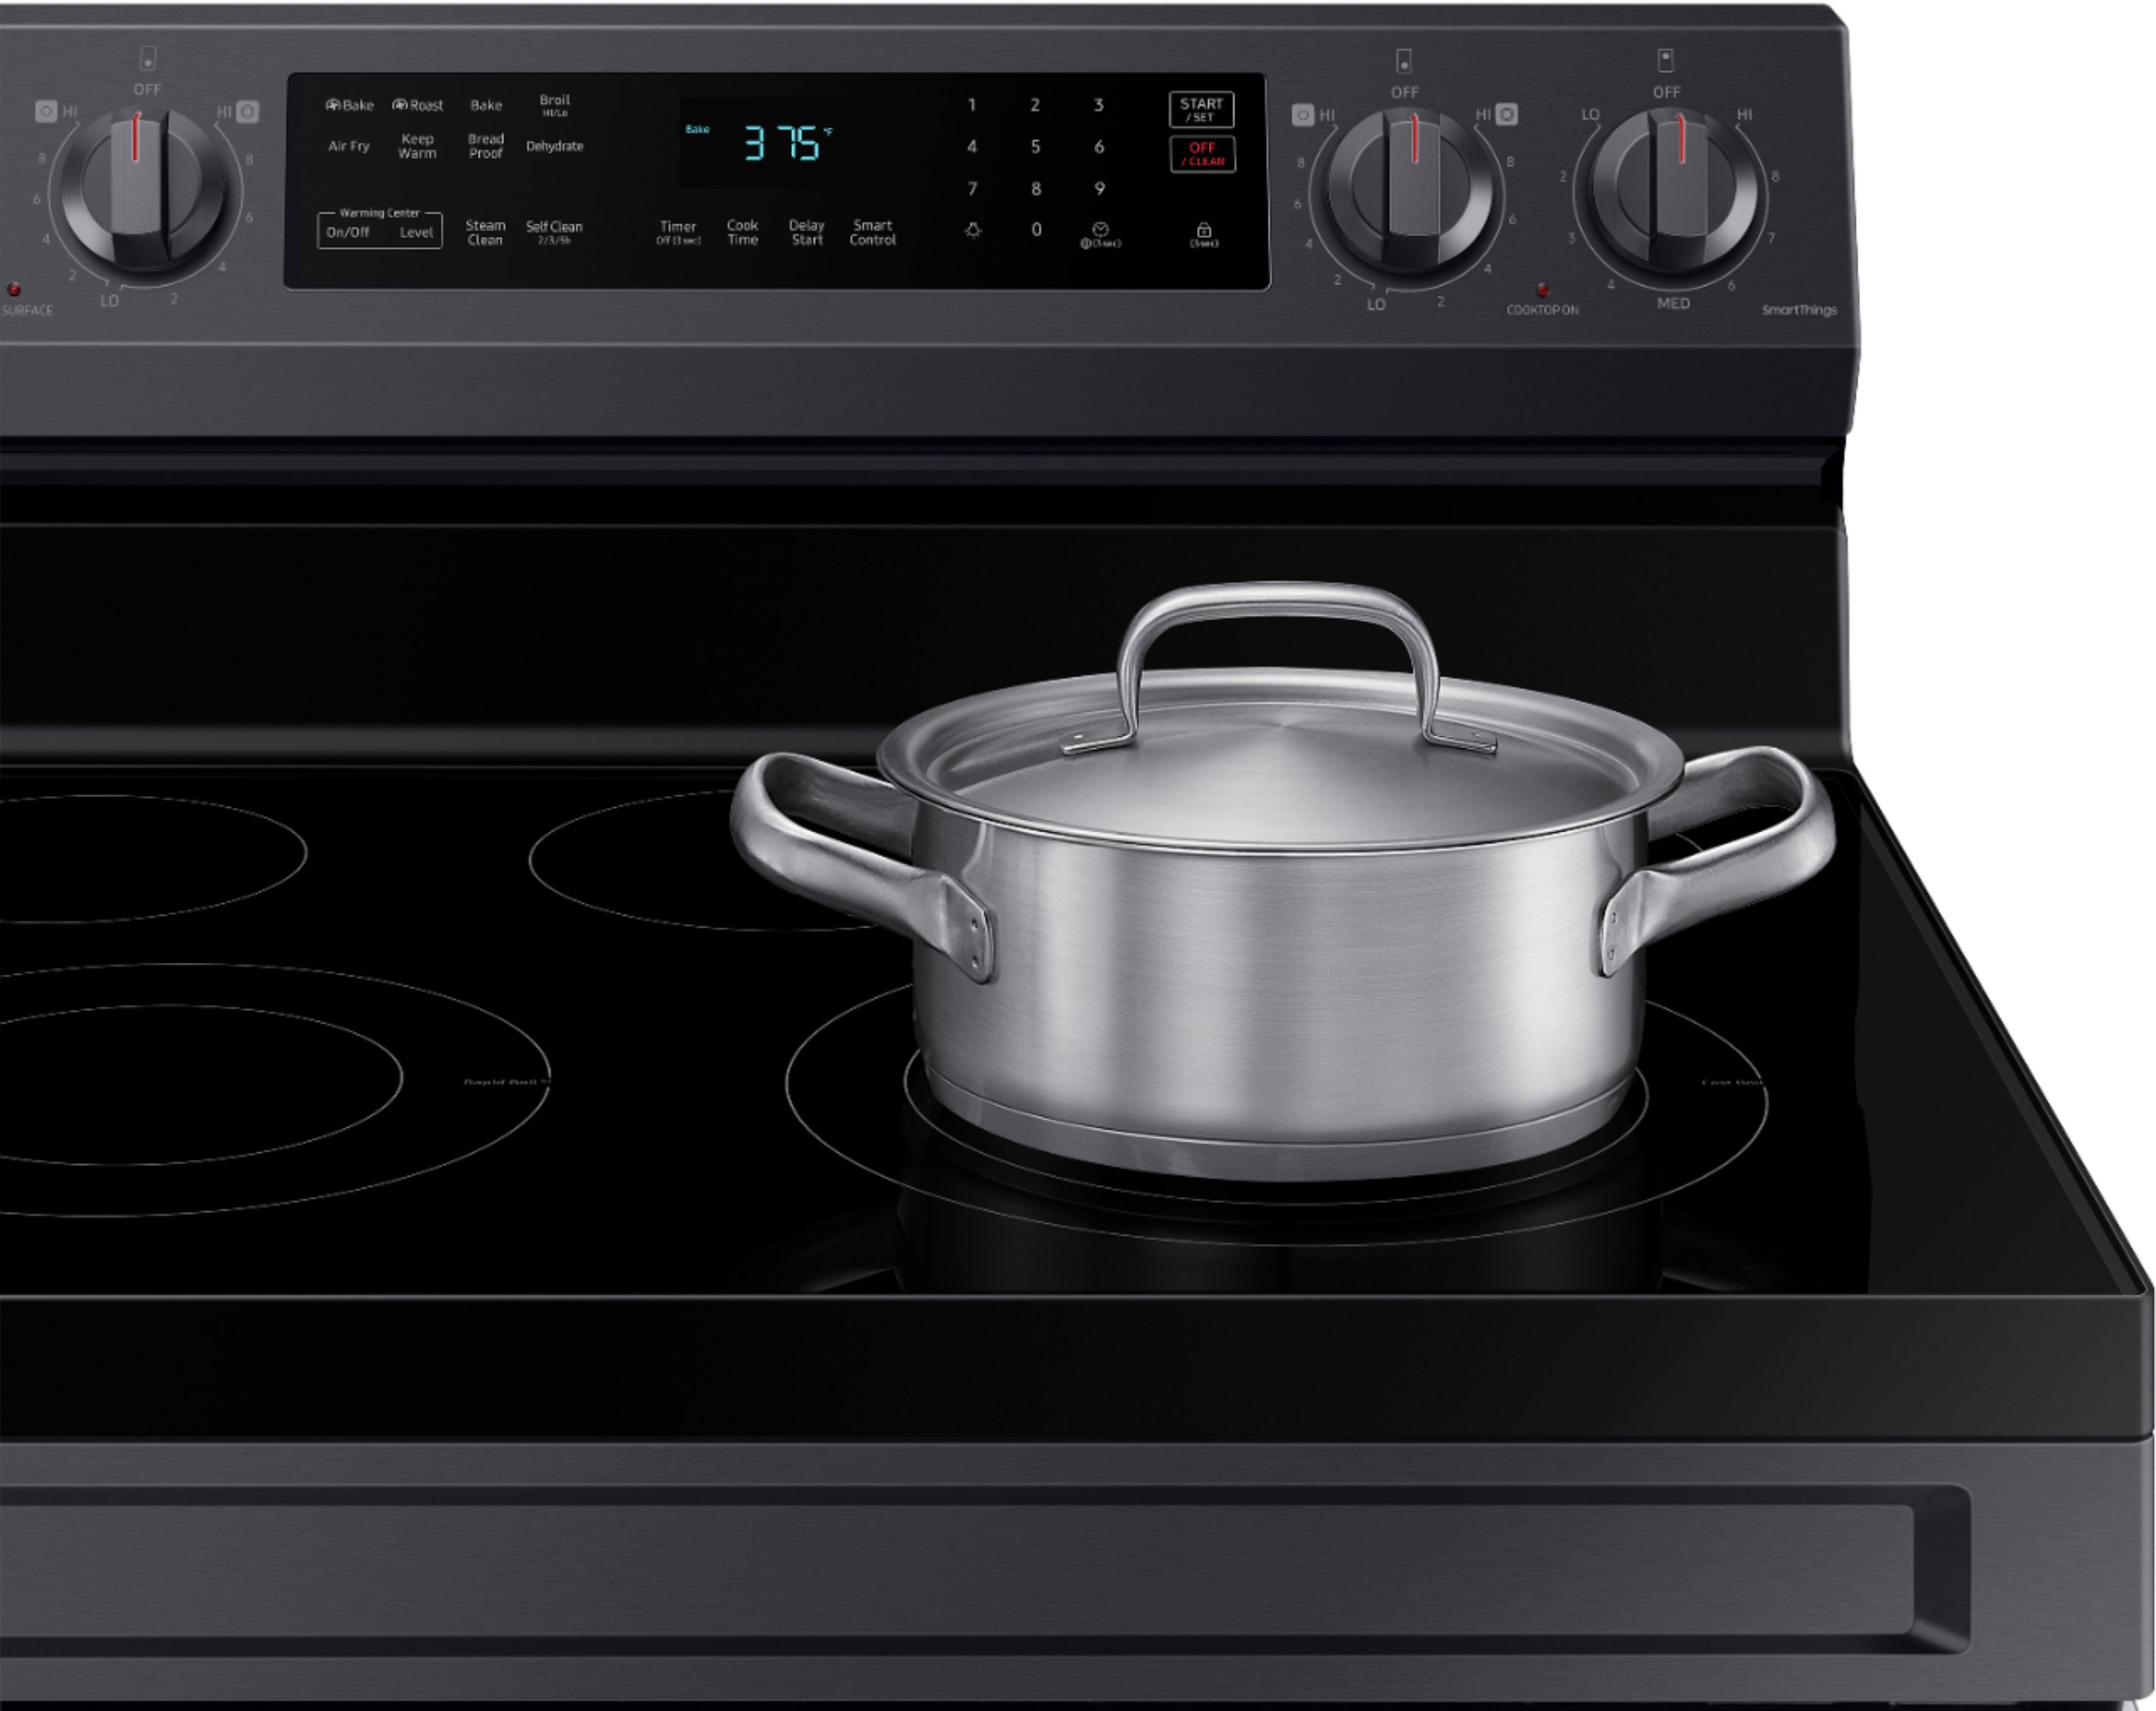 GE's touch-savvy induction cooktops double as griddles and sous vides